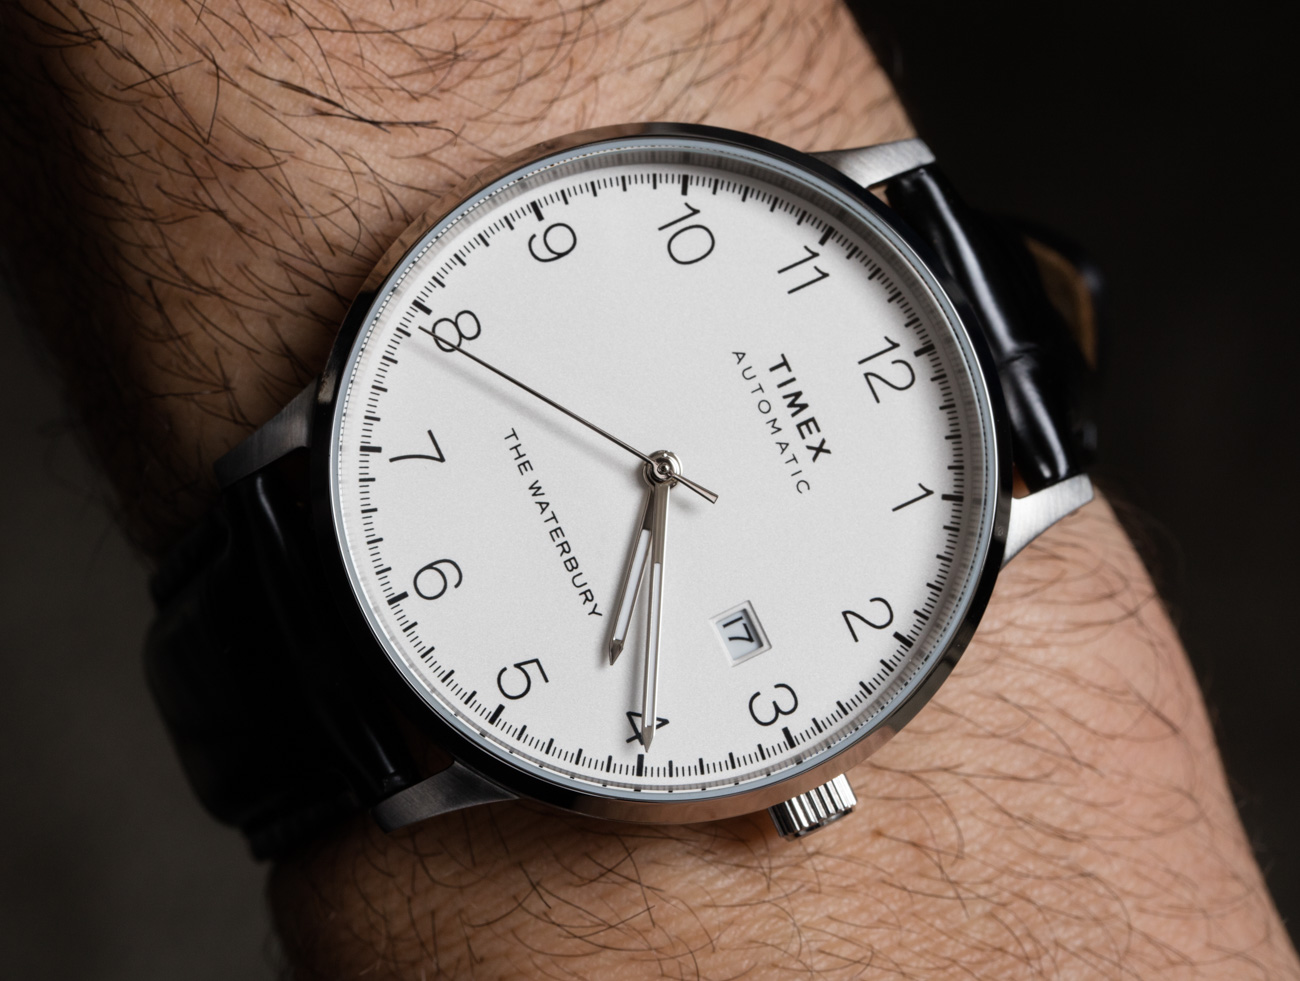 Timex Waterbury Classic Automatic Watch Hands-On | aBlogtoWatch